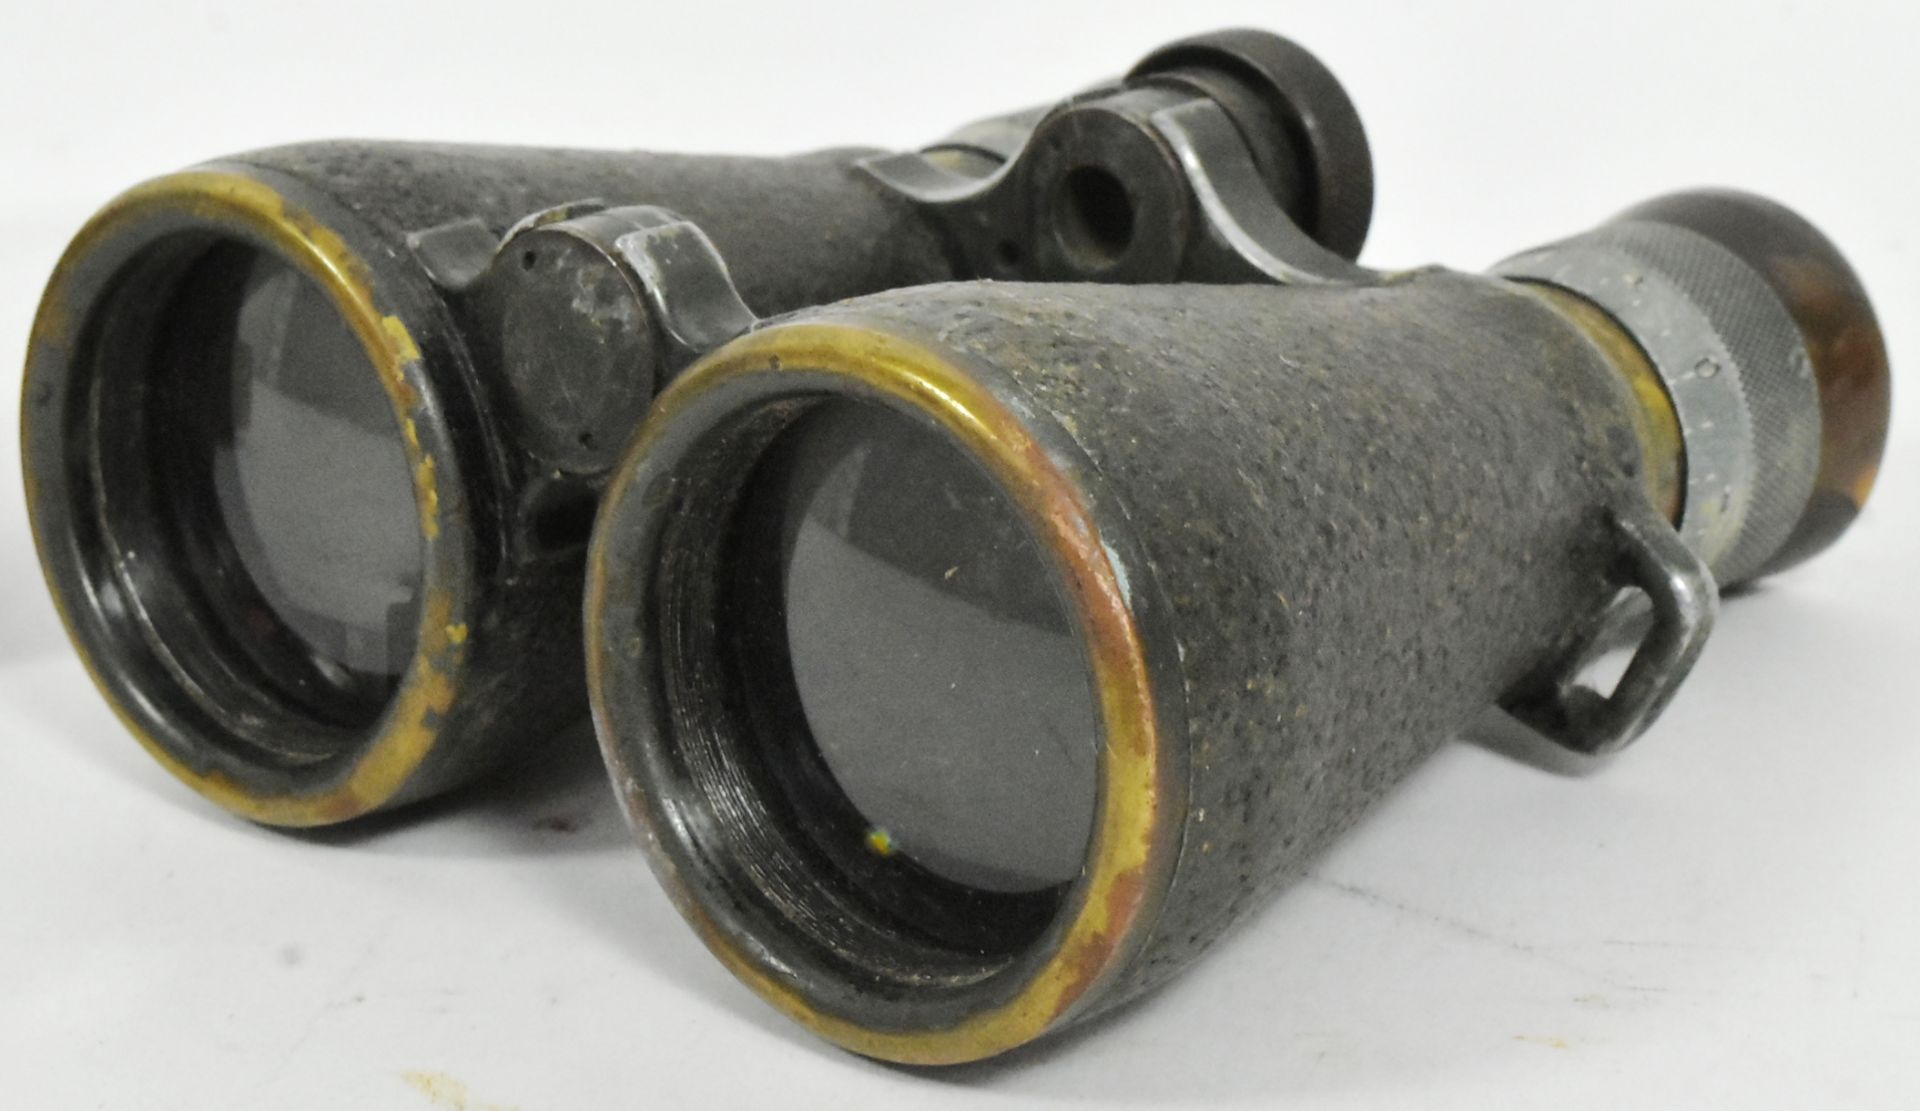 TWO PAIRS OF EARLY 20TH CENTURY BINOCULARS - Image 2 of 6